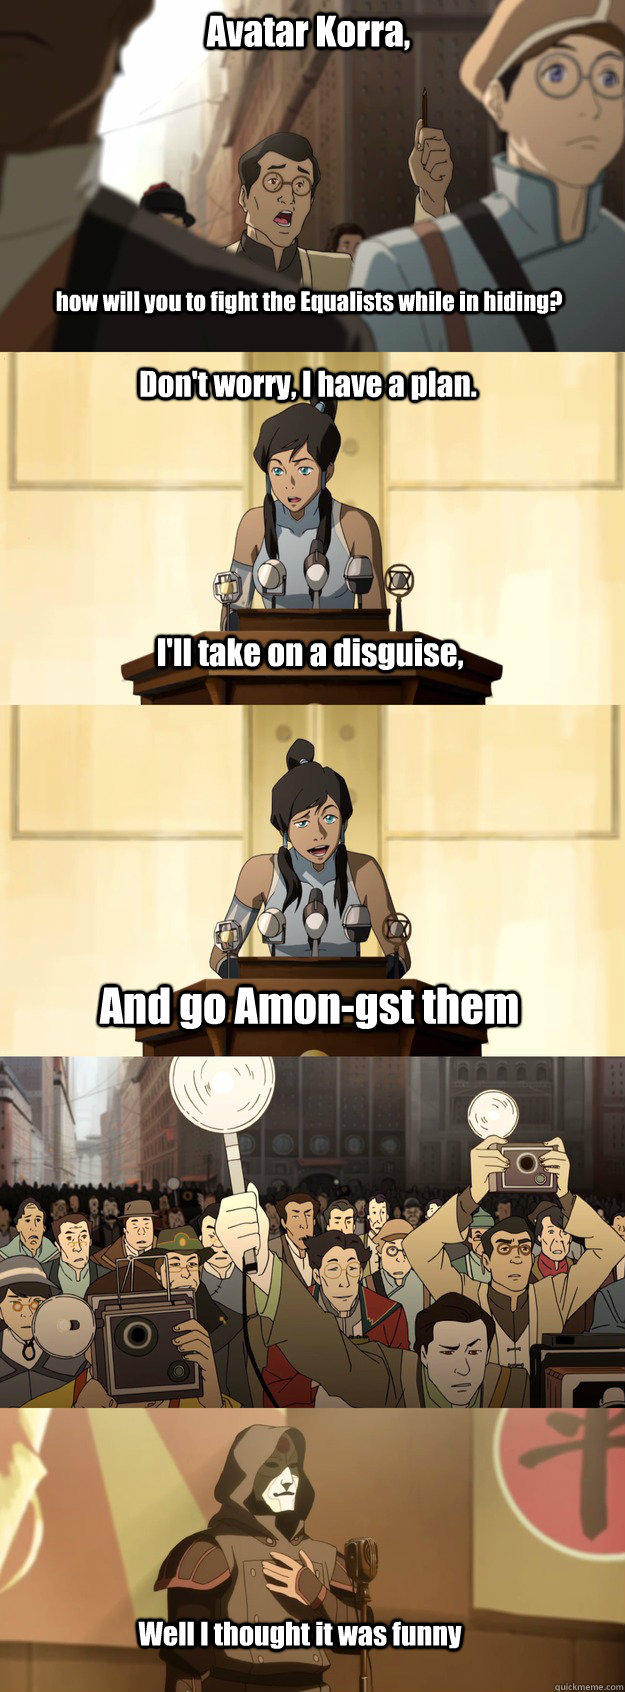 Avatar Korra, how will you to fight the Equalists while in hiding? Don't  worry, I have a plan. I'll take on a disguise, And go Amon-gst them Well I  thought it was